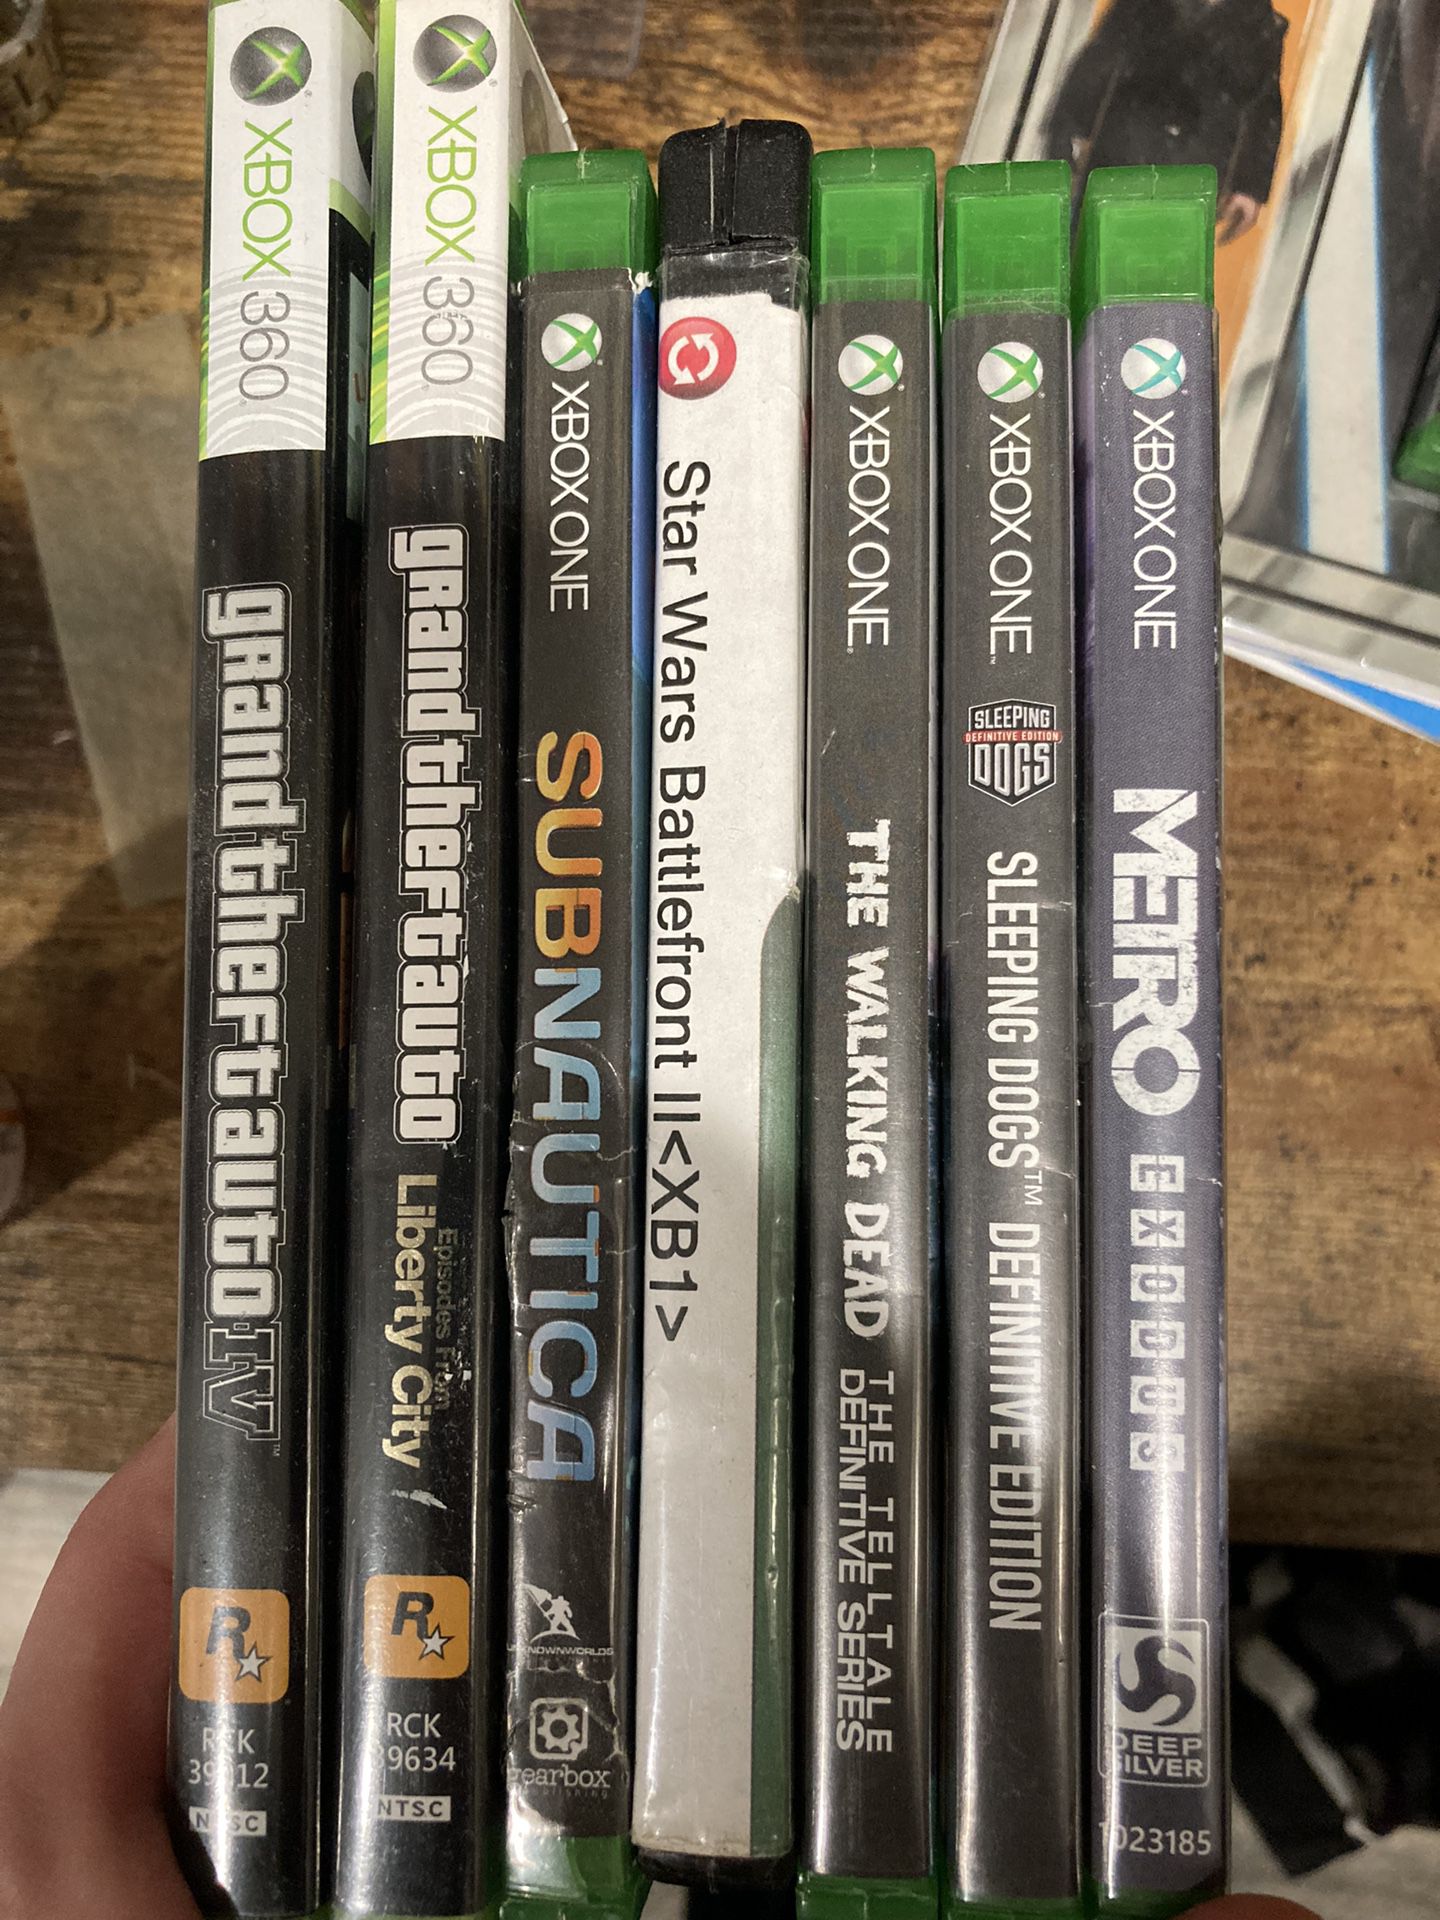 Xbox Games (in Good Condition)